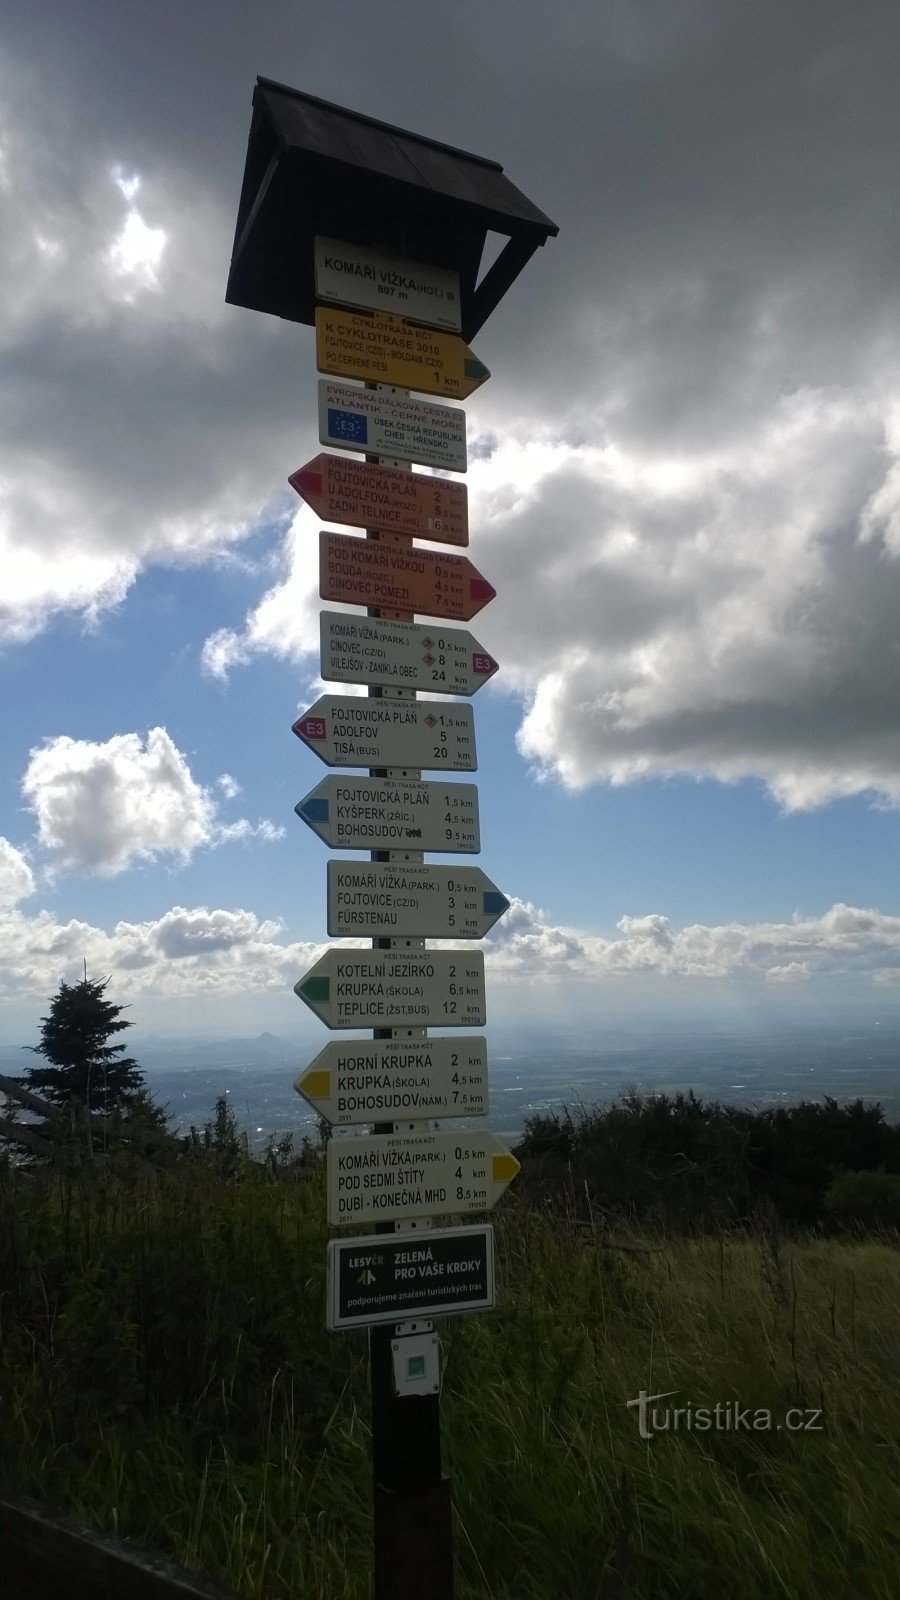 Signpost at the top.